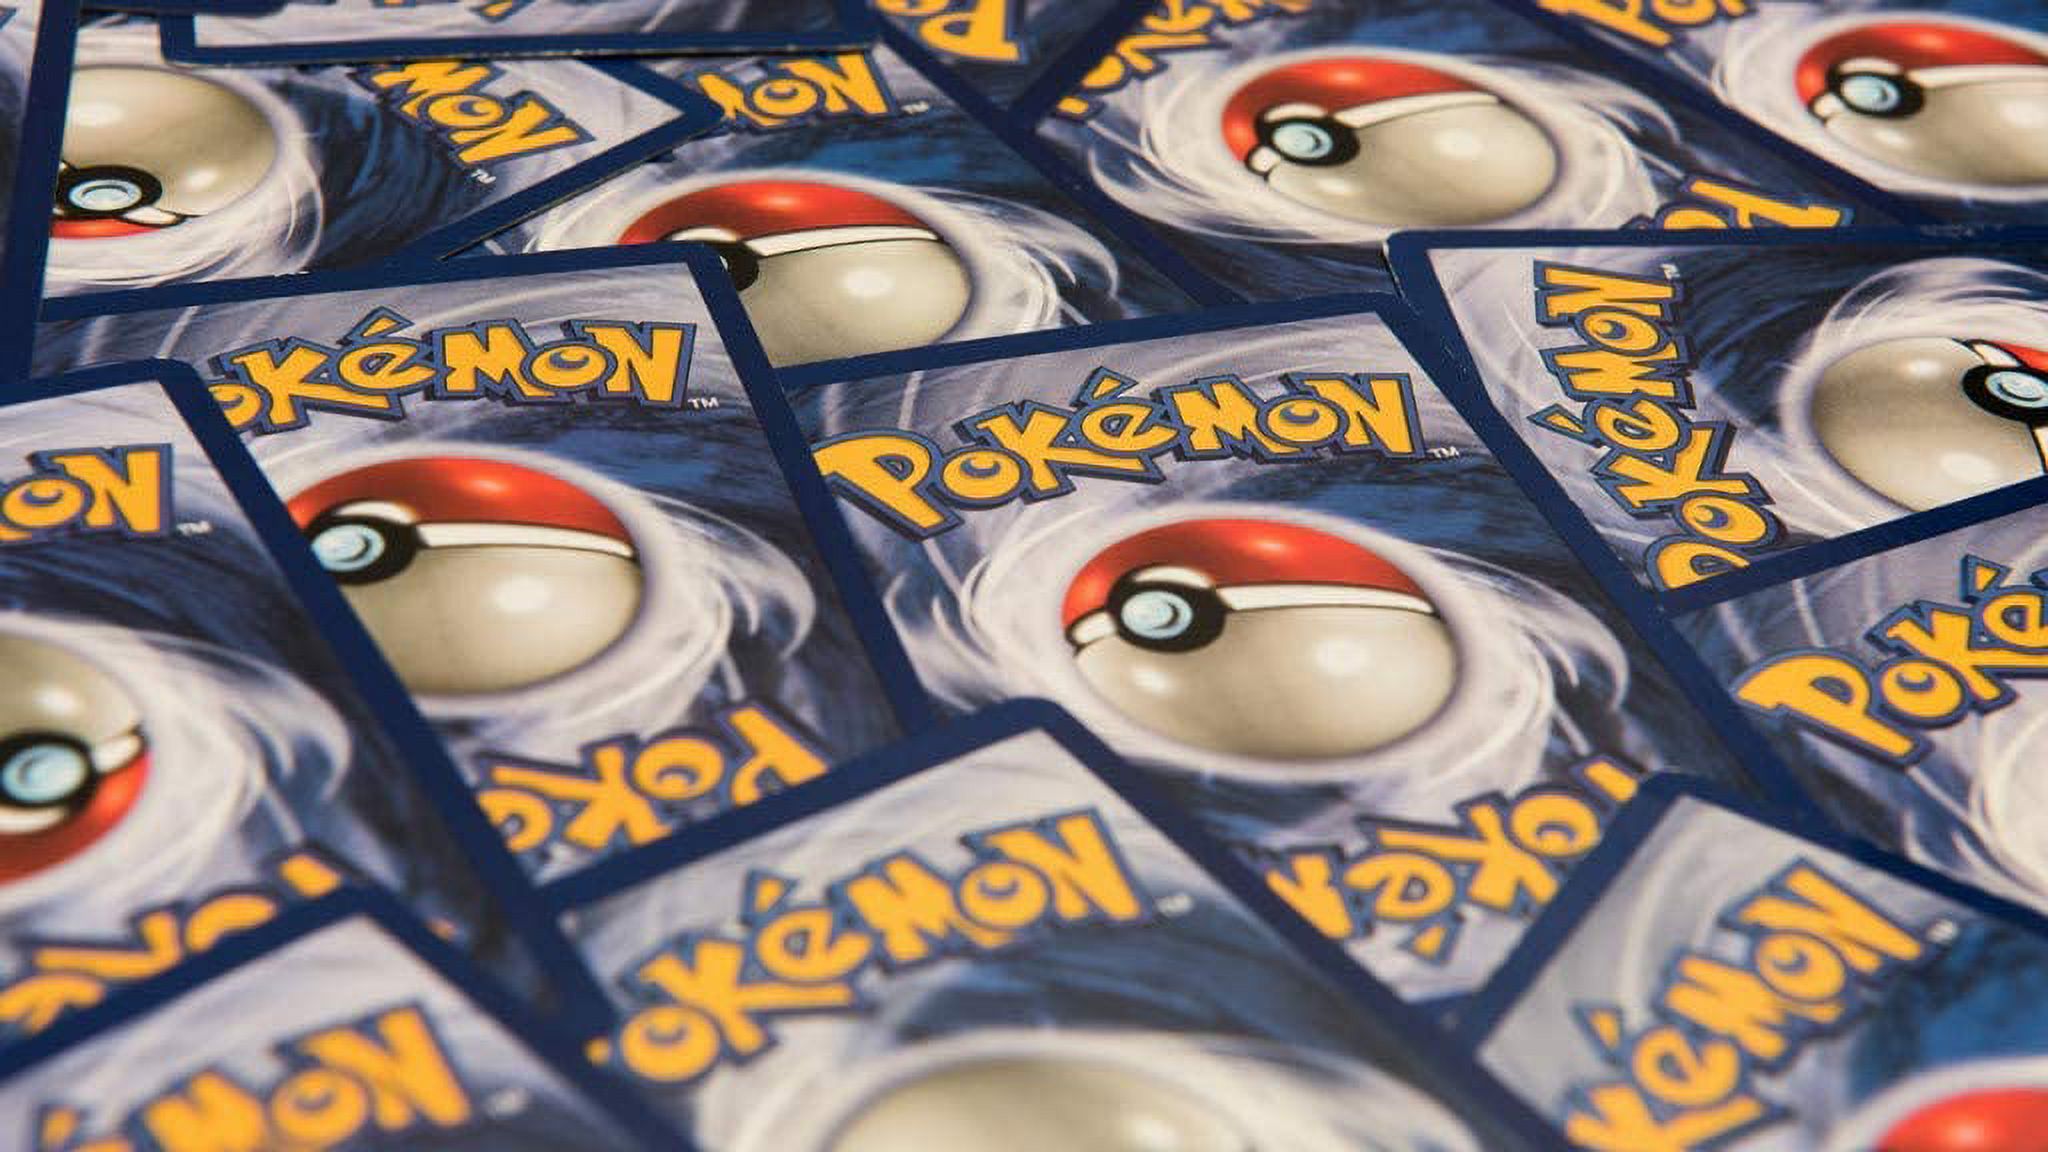 Pokemon TCG: 3 Booster Packs - 30 Cards Total| Value Pack Includes 3 Blister Packs of Random Cards | 100% Authentic Branded Pokemon Expansion Packs | Random Chance at Rares & Holofoils - image 3 of 4